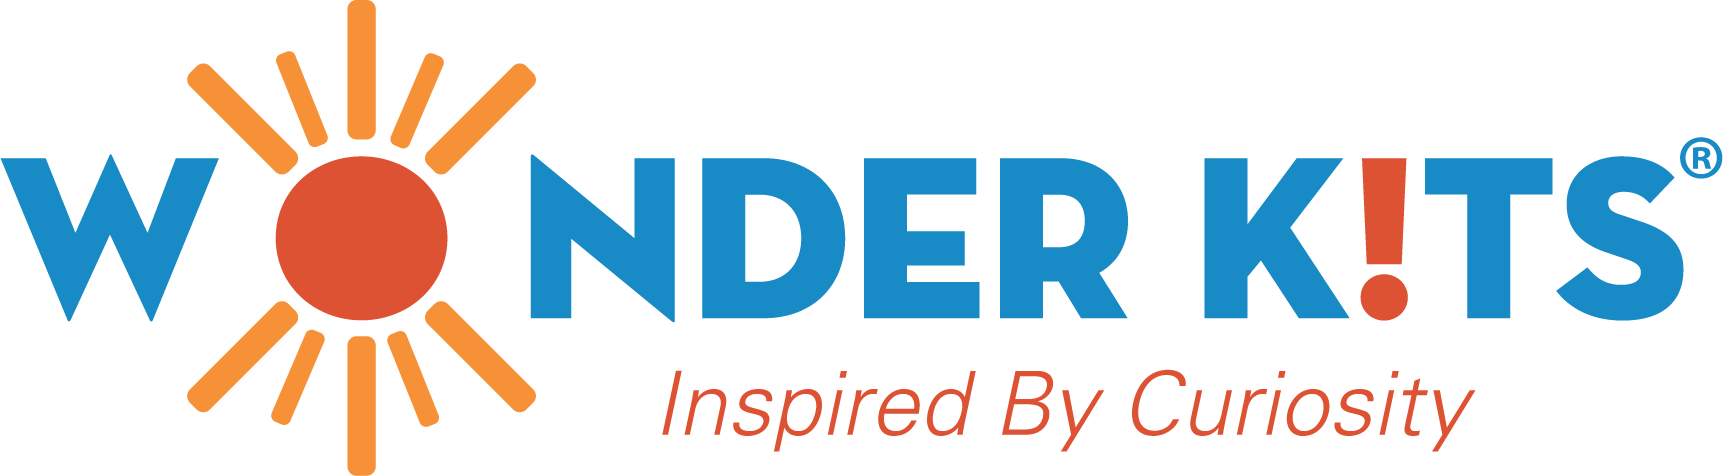 Wonder Kits Inspired By Curiosity